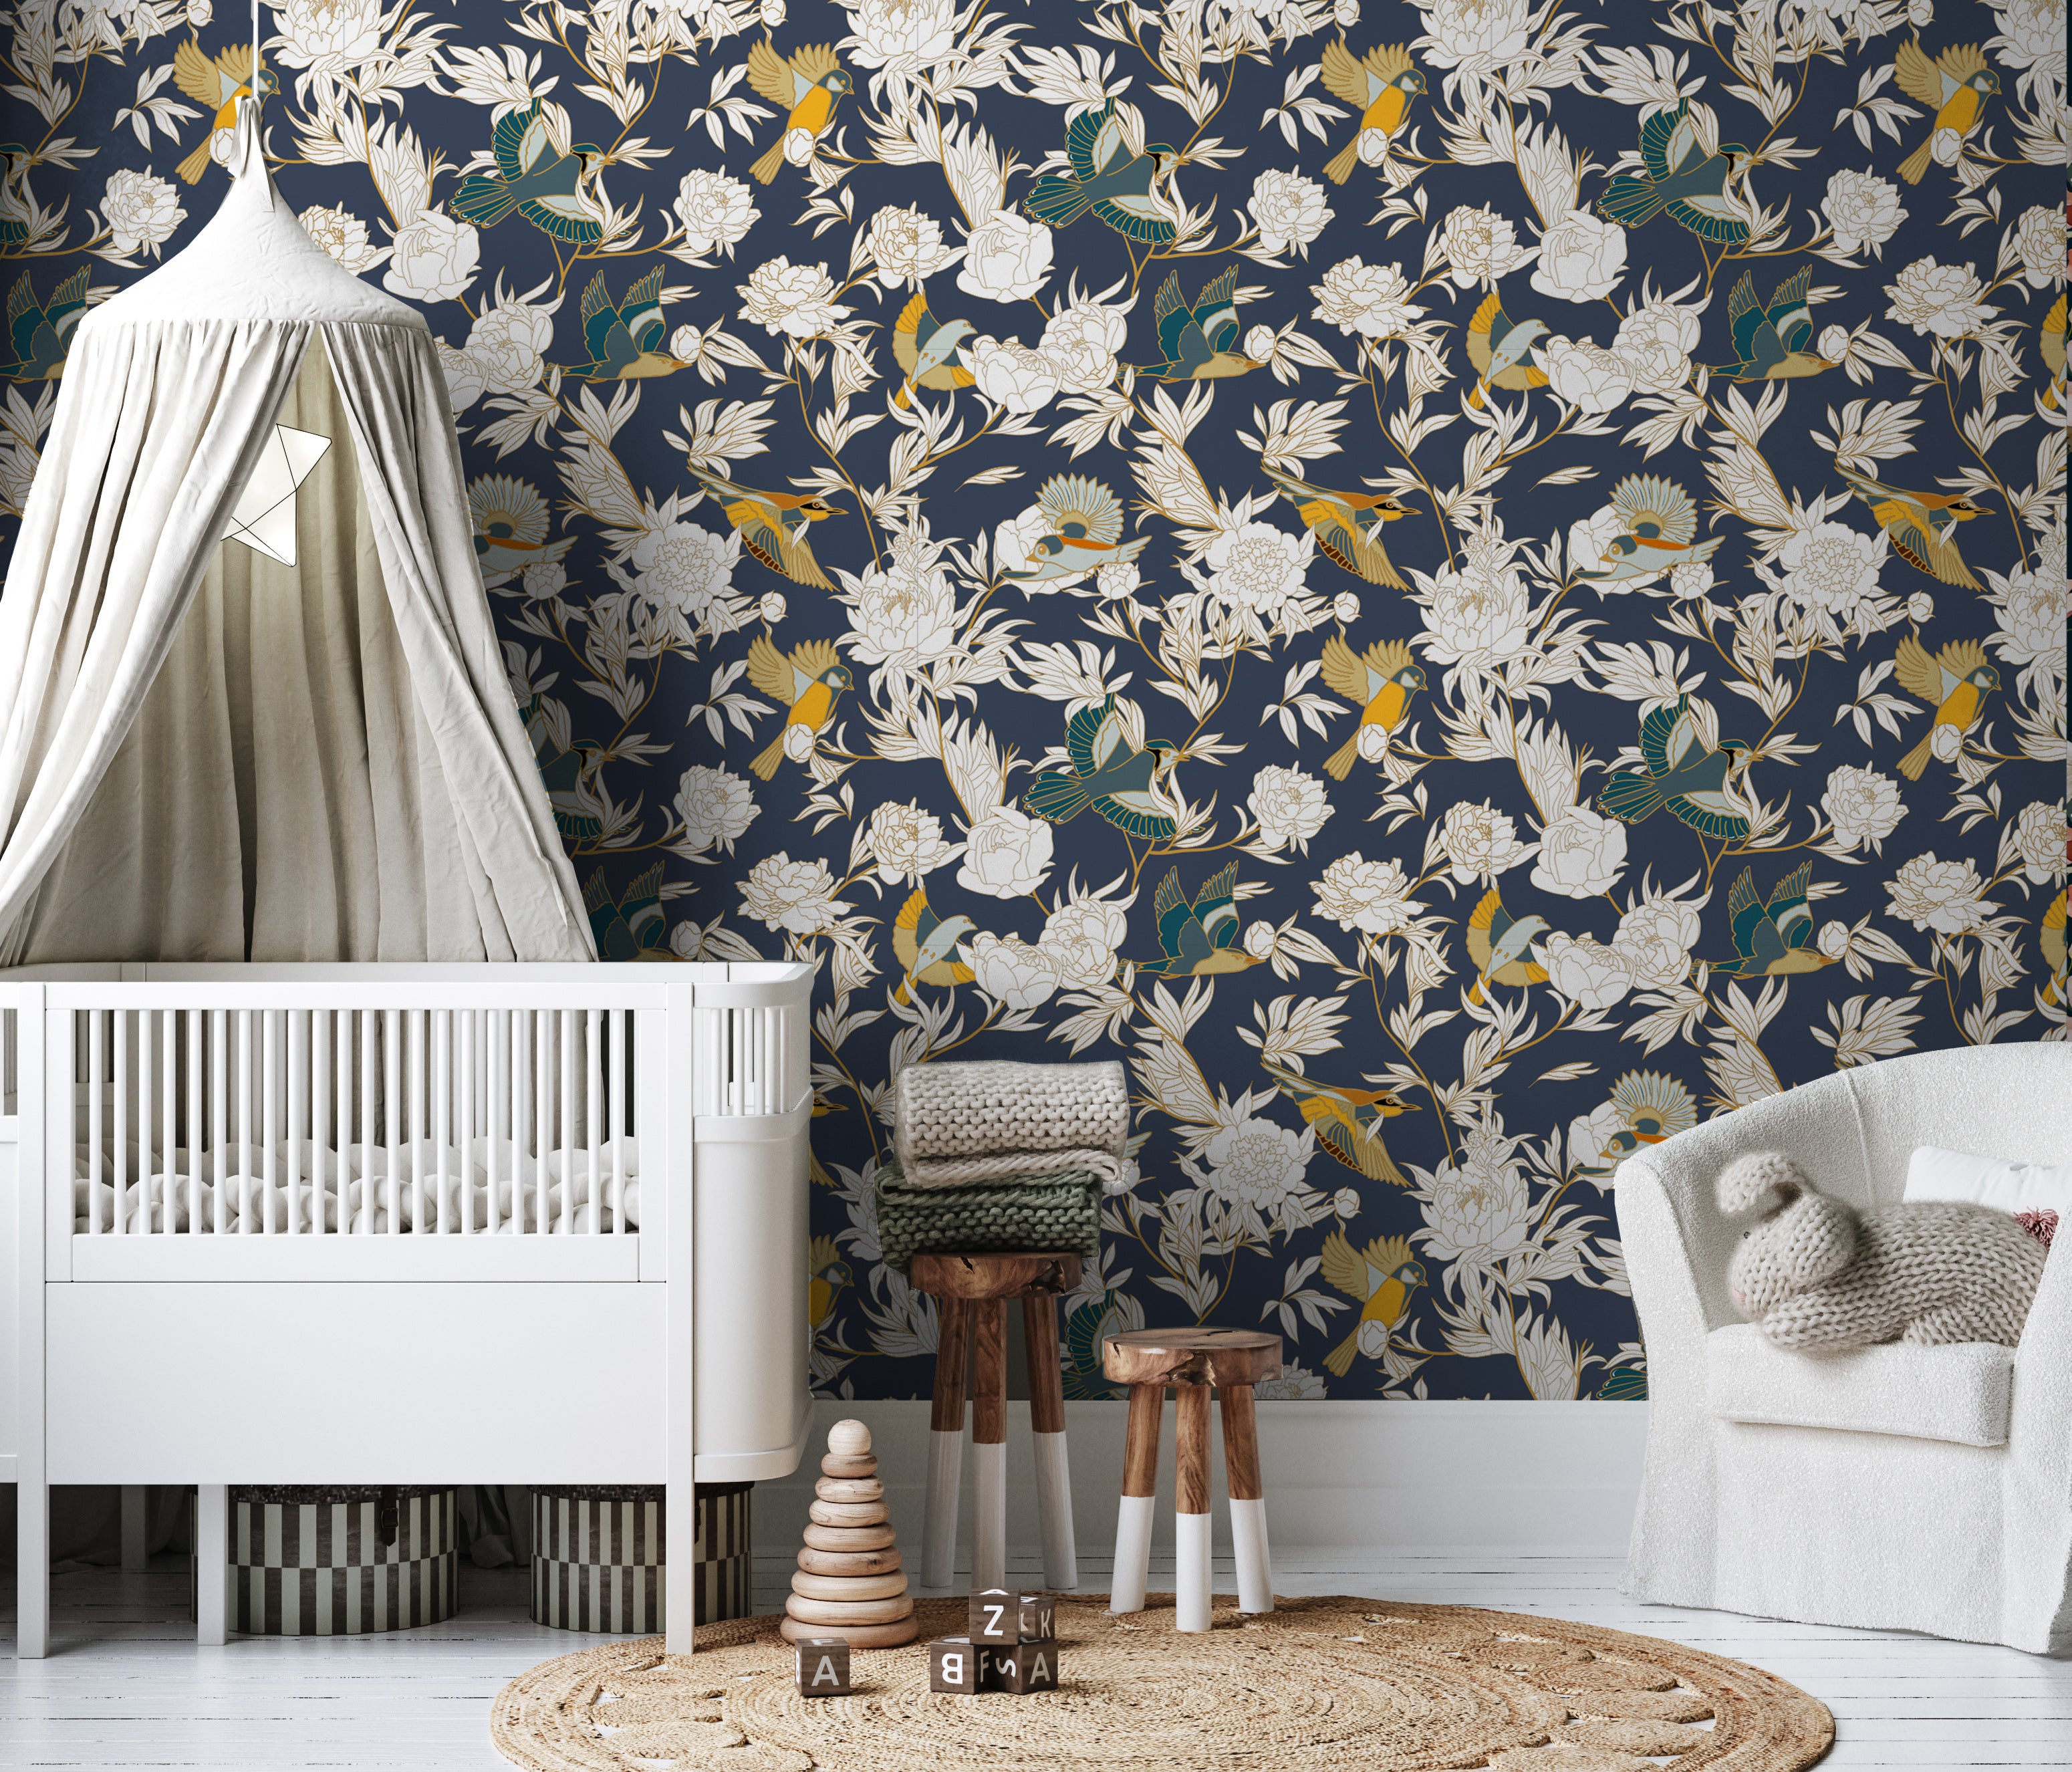 Bird Ogee Navy and Fern Green Peel and Stick Wallpaper NW46204 by NextWall  Wallpaper